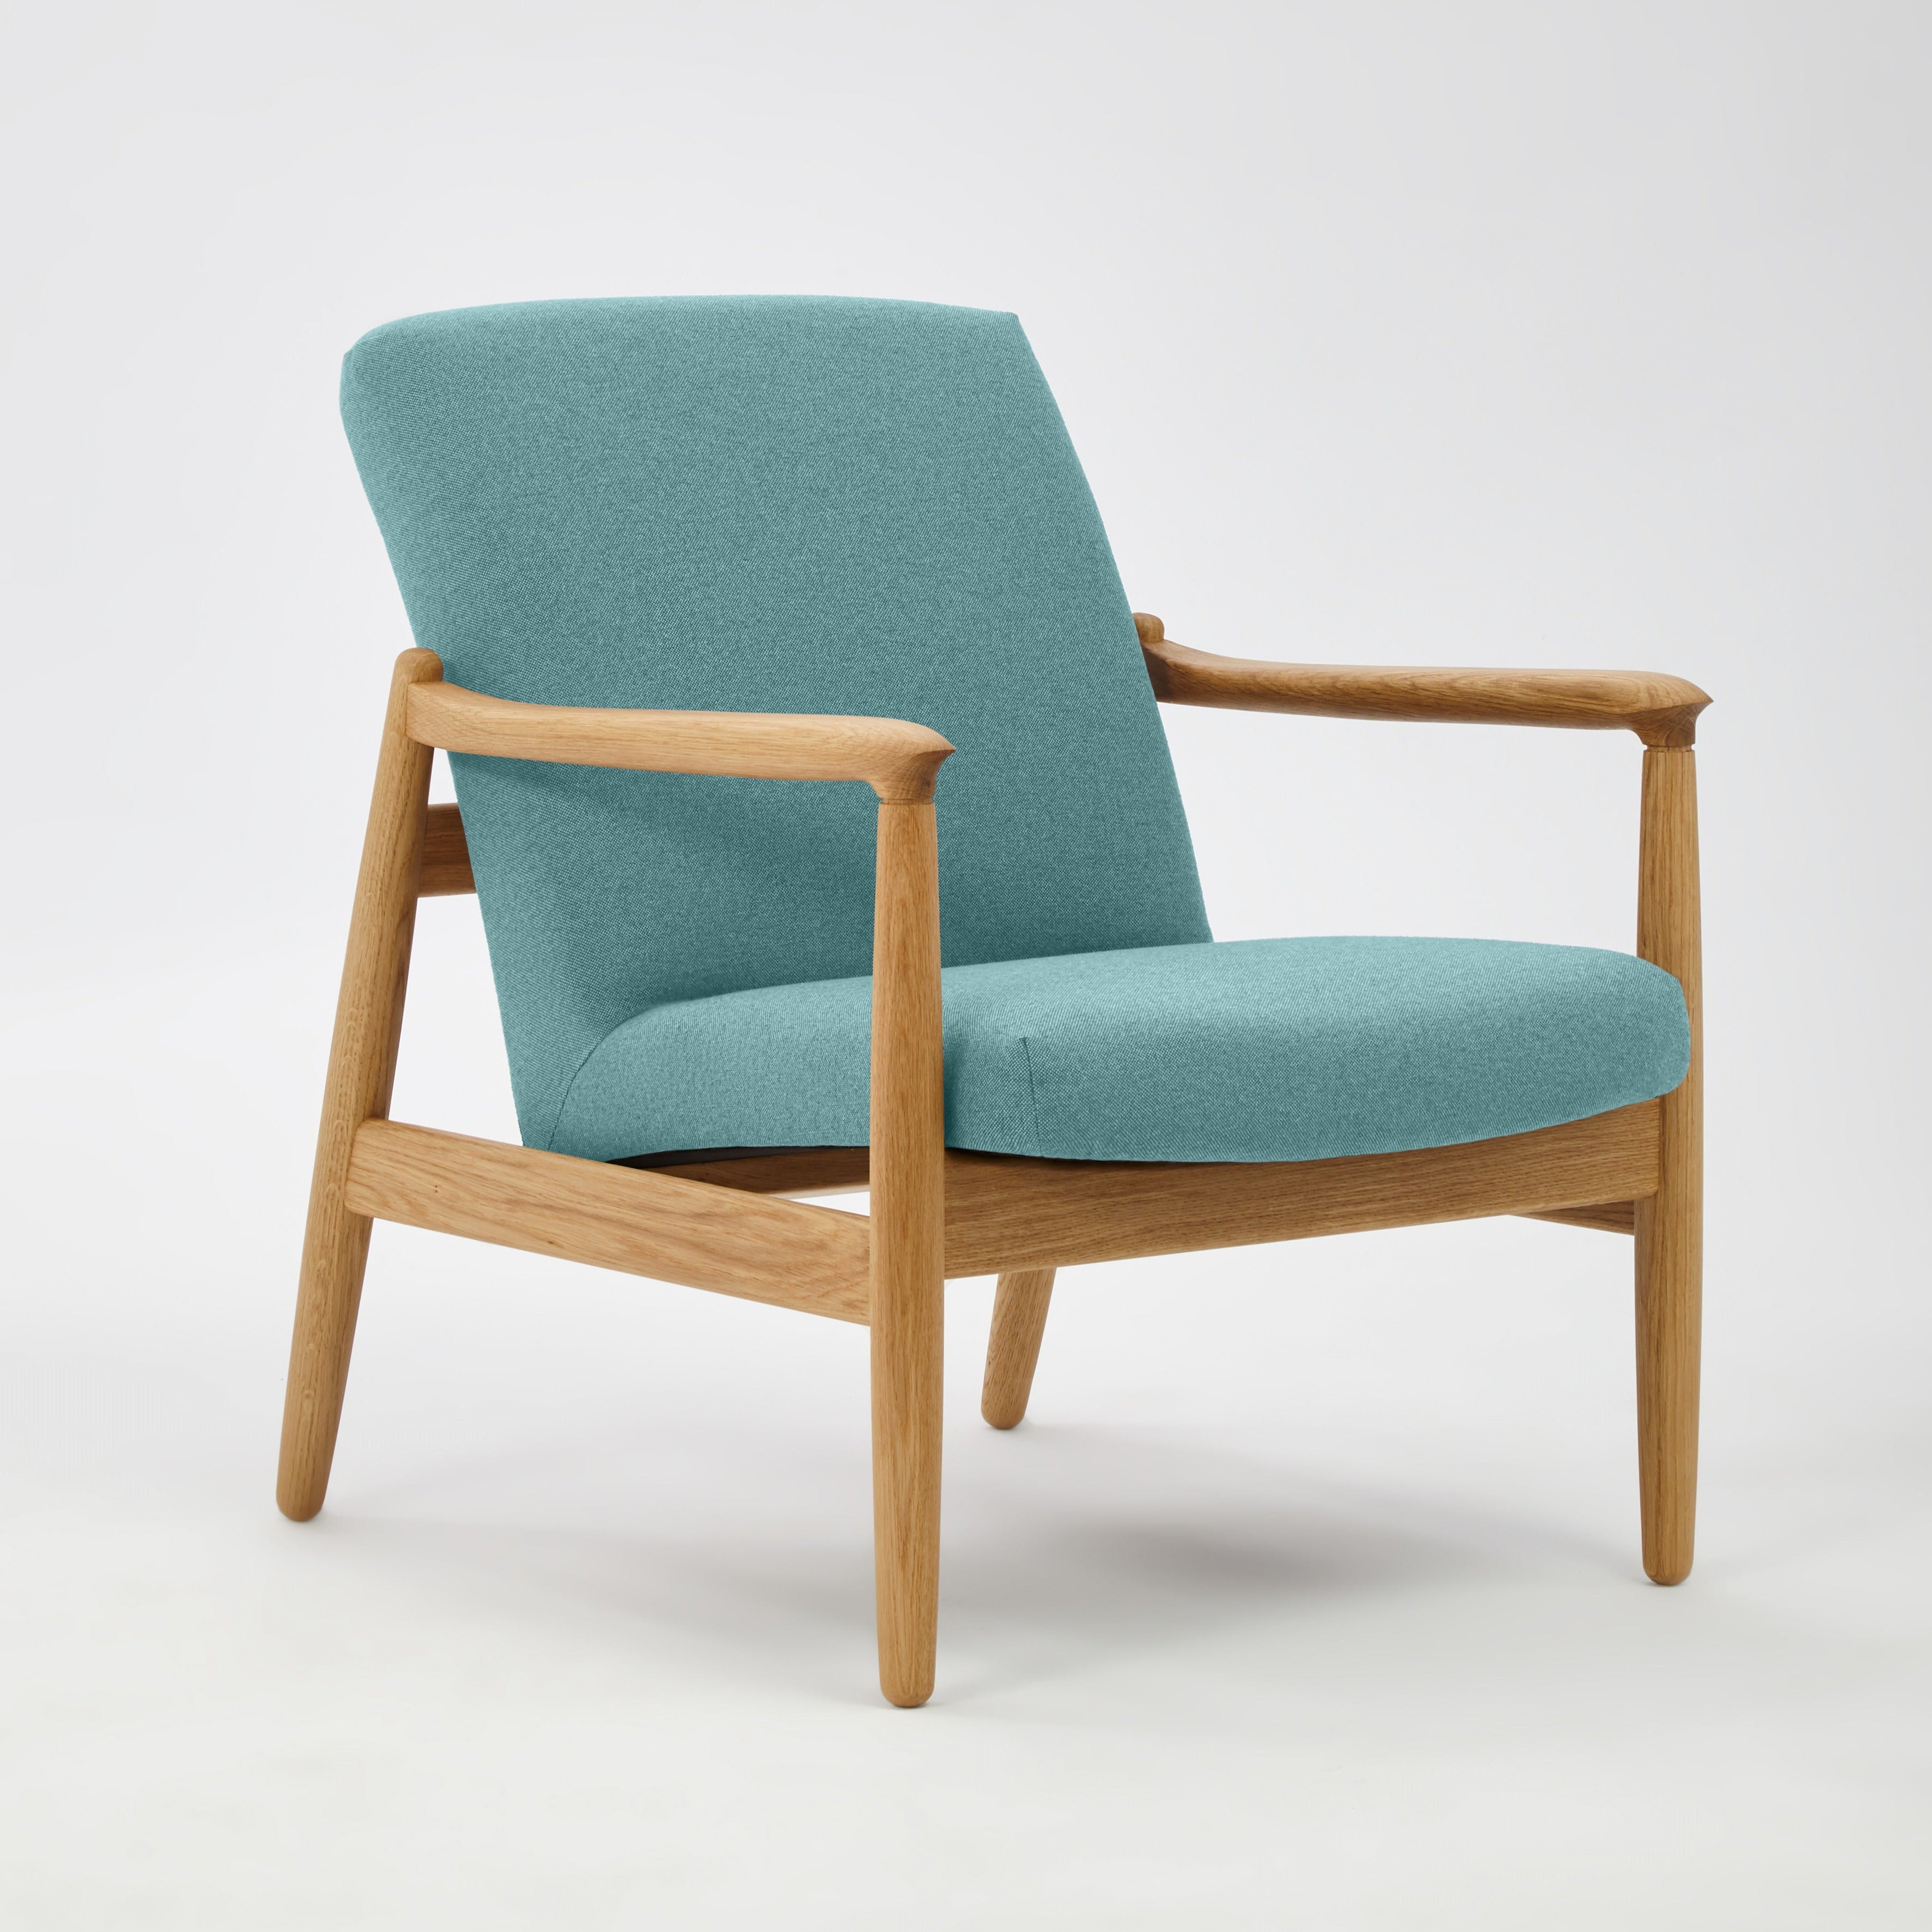 H 64 Lowback Chair white finish white oak frame upholstery colour turquoise